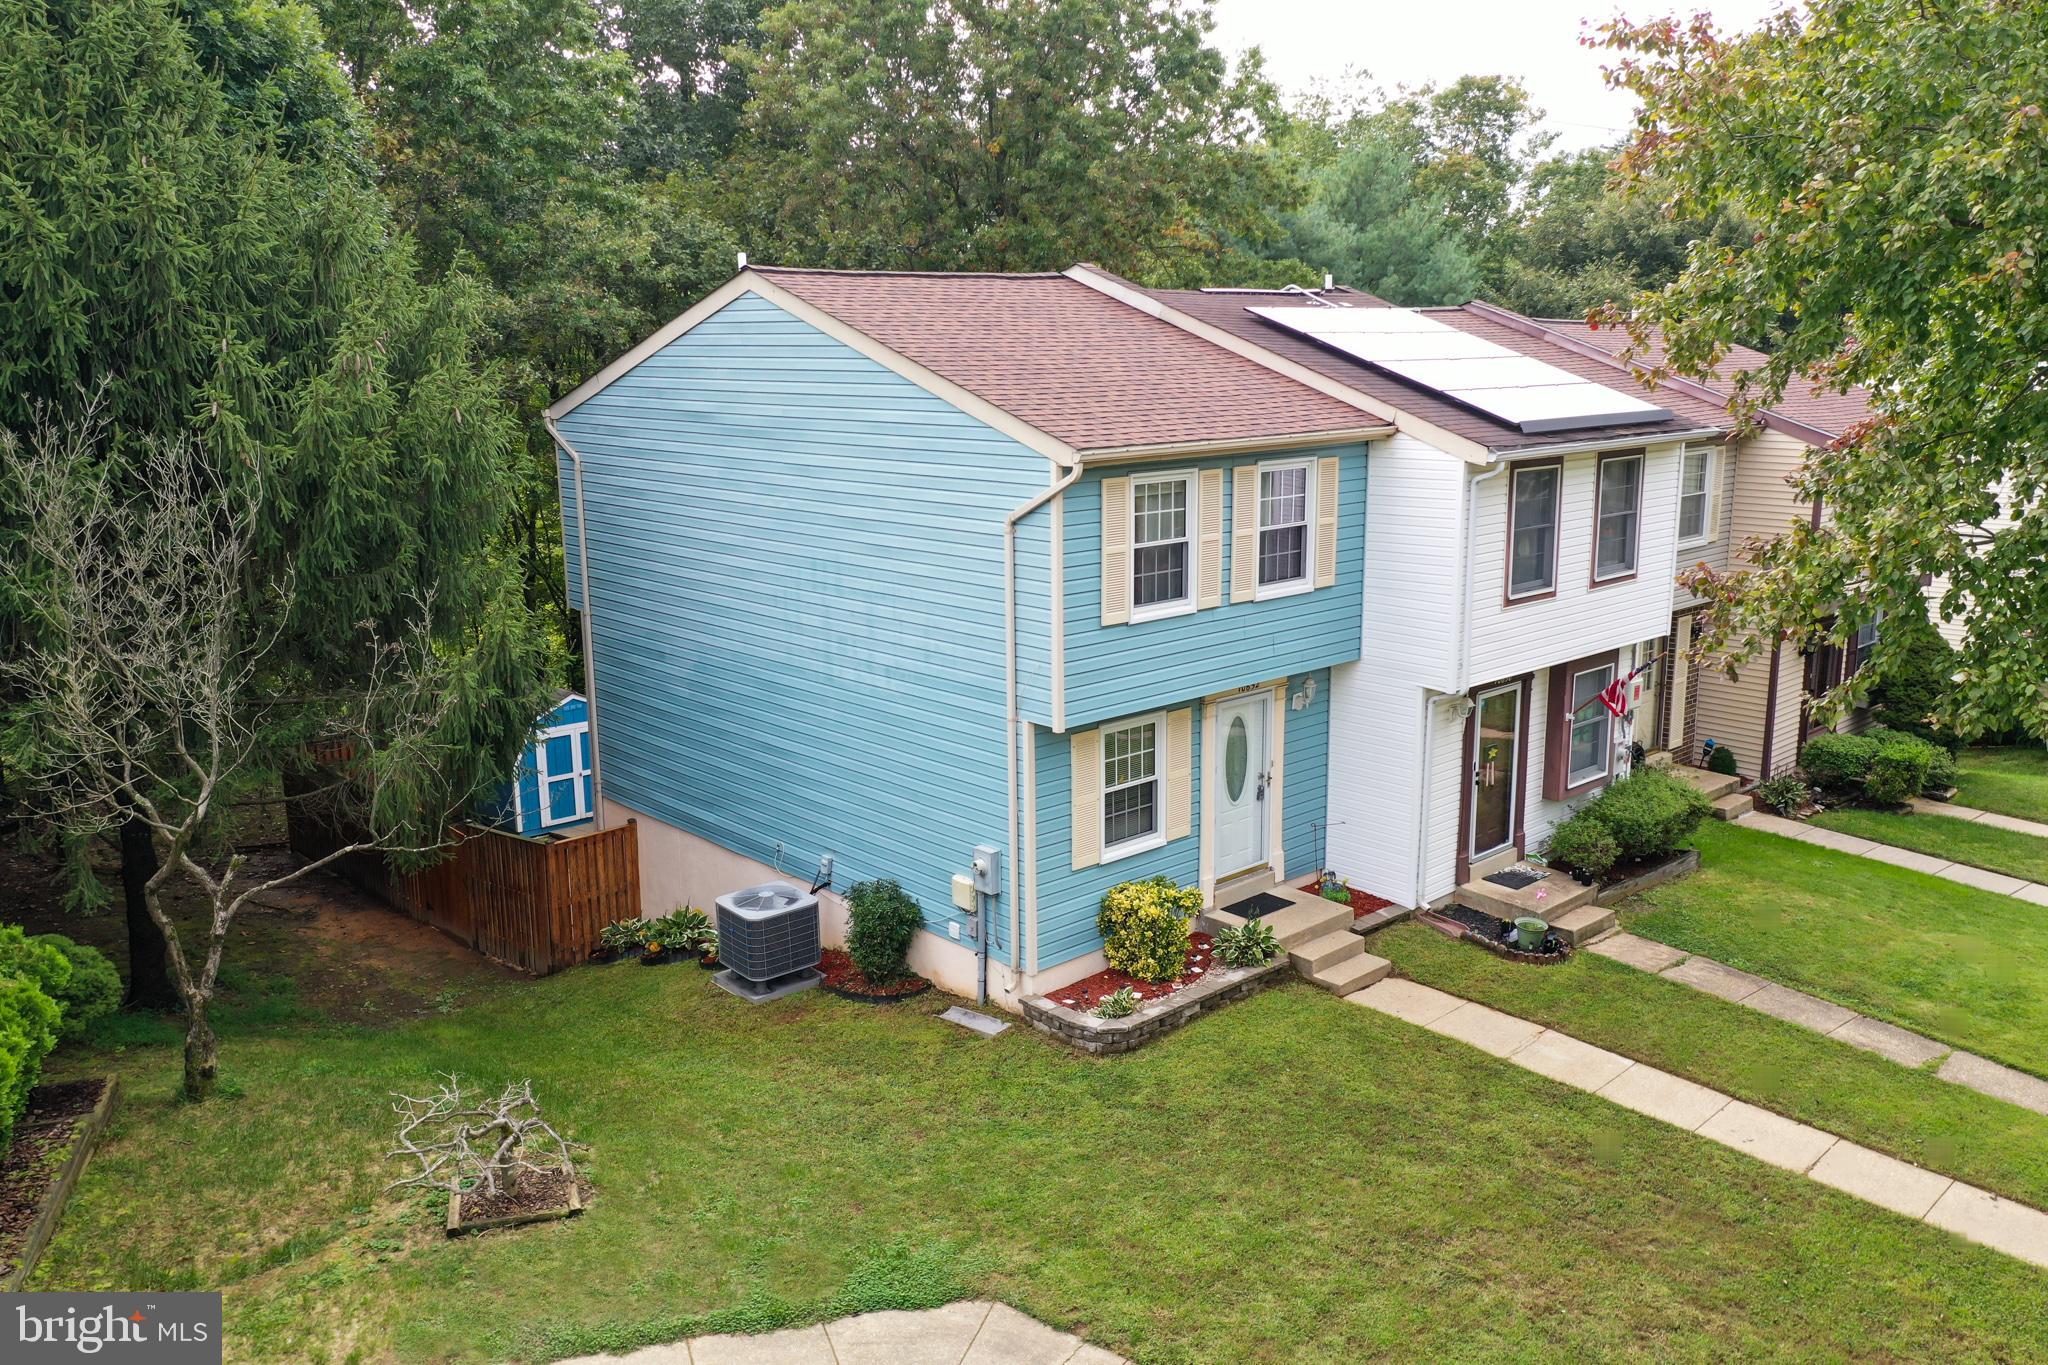 a aerial view of a house with yard and sitting area